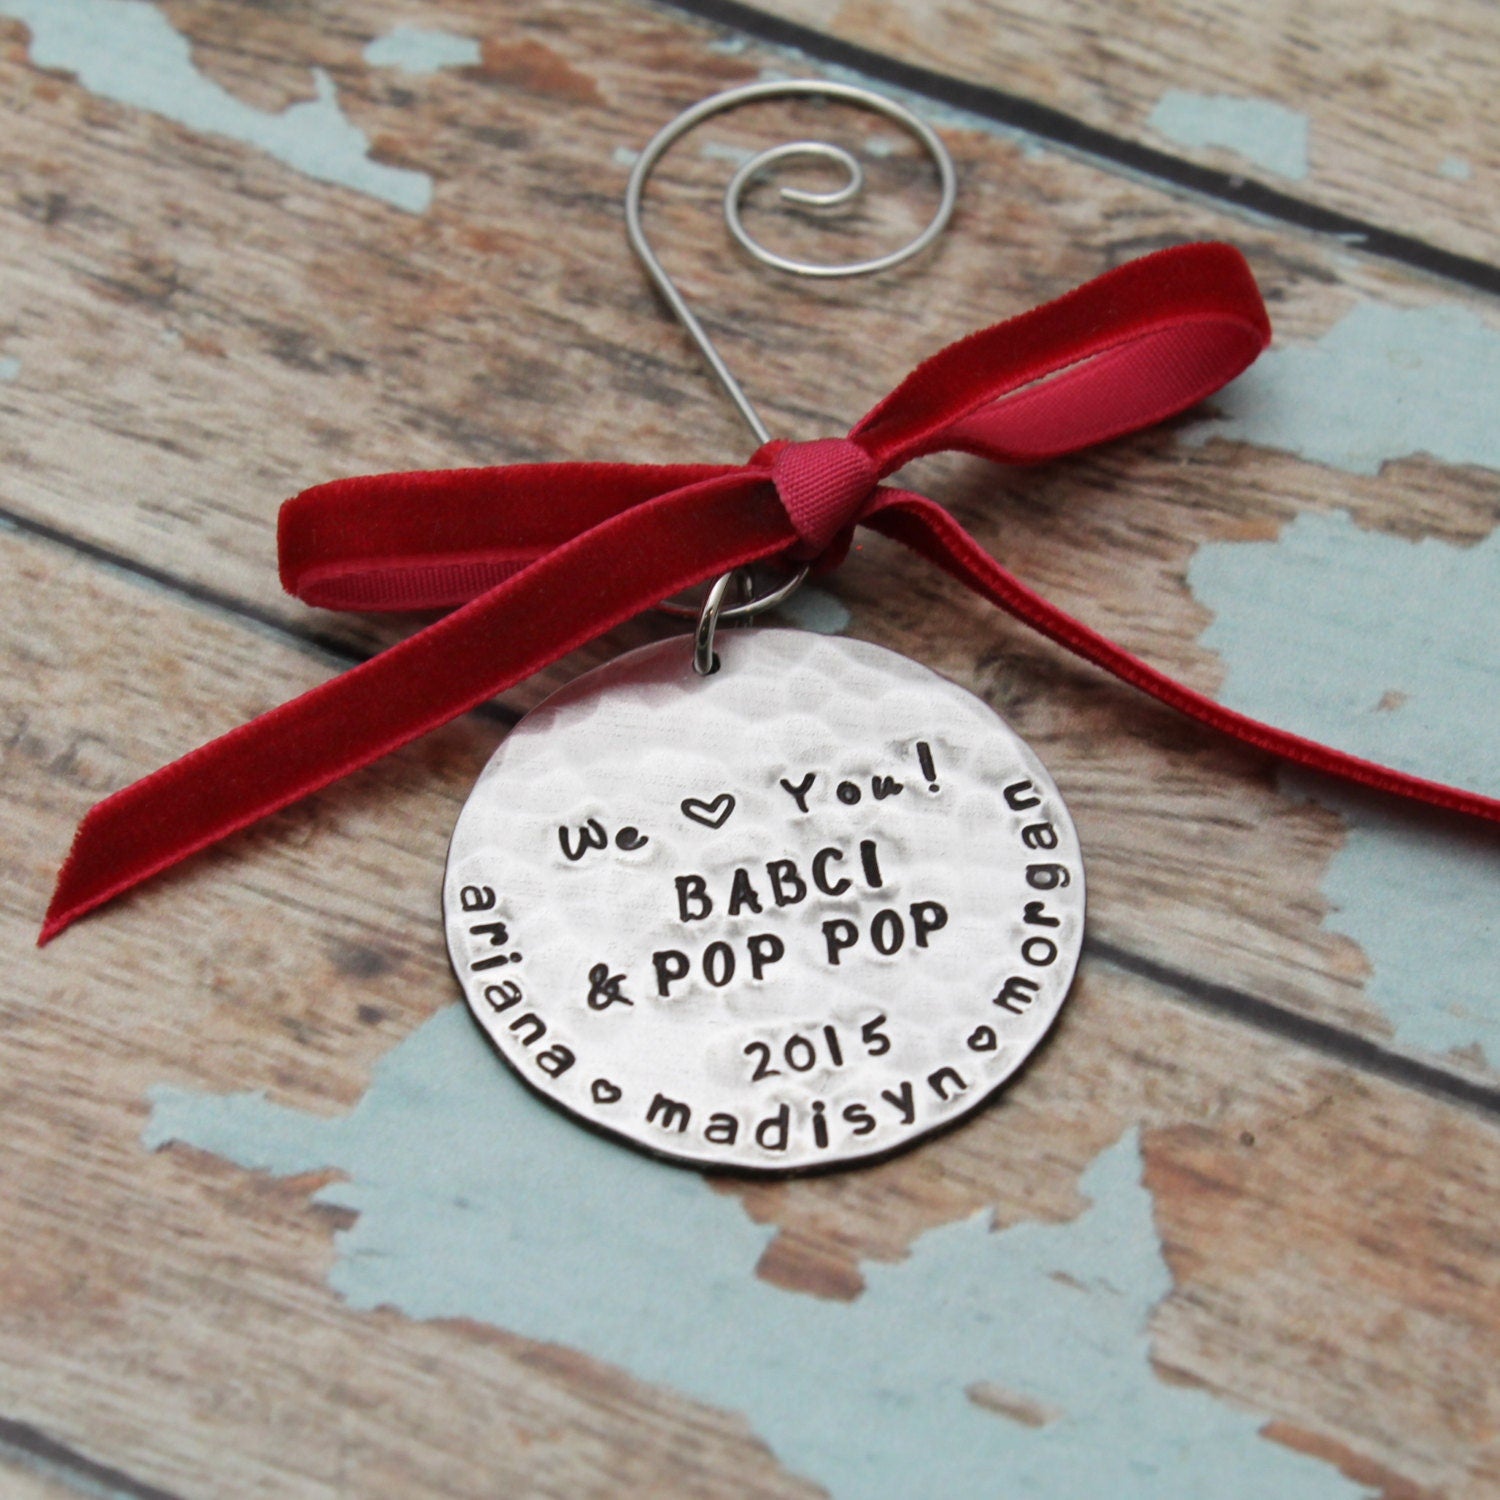 Grandparents Ornament, Christmas Ornament Personalized, We Love You Grandma and Grandpa Gift, Grandparents, Gift, Hand Stamped in Aluminum